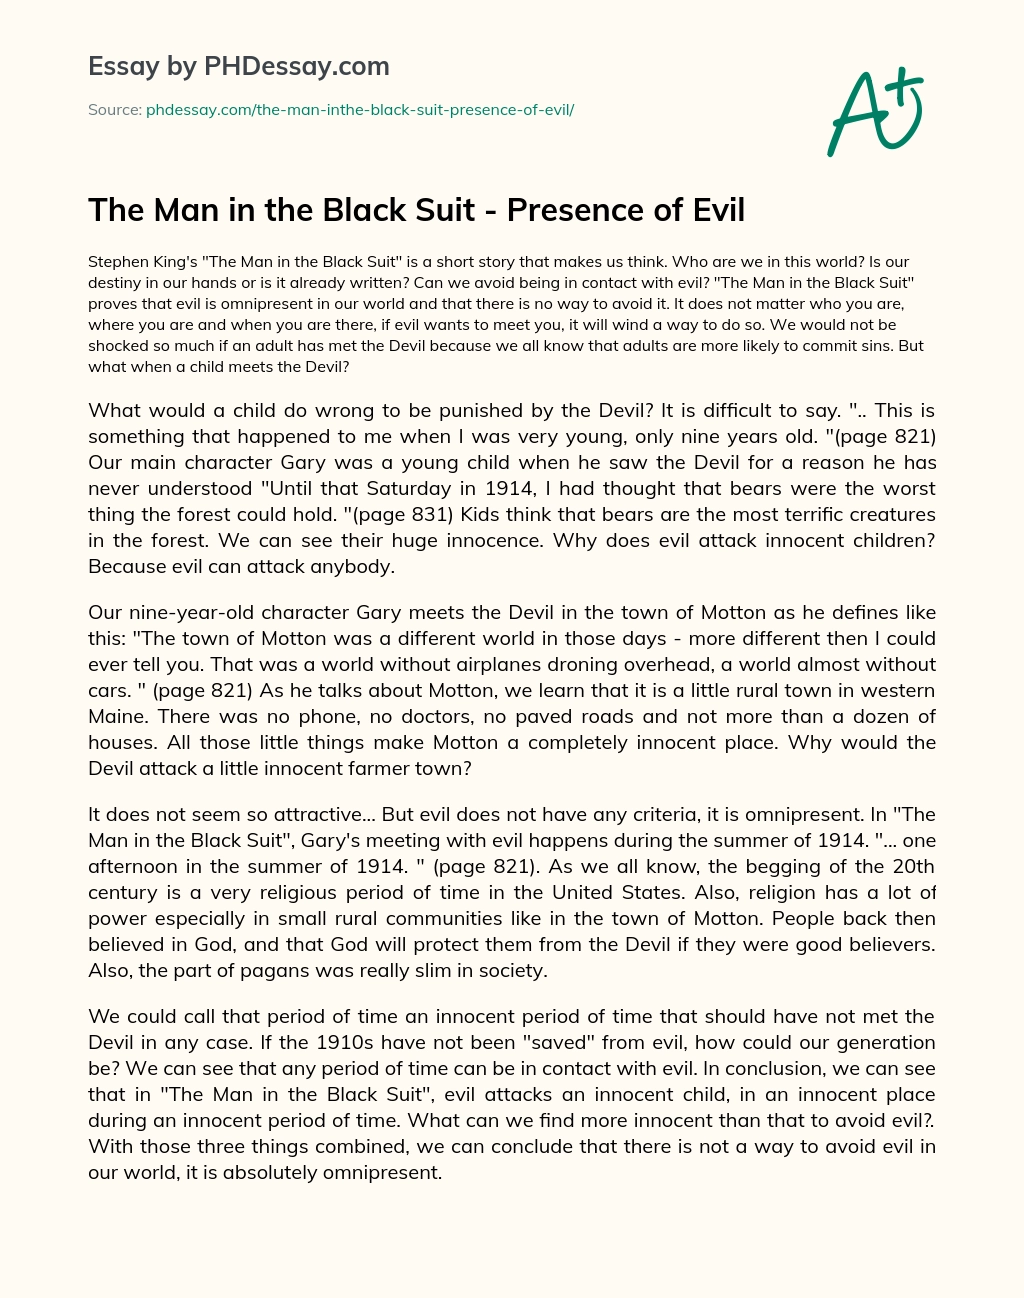 The Man in the Black Suit – Presence of Evil essay